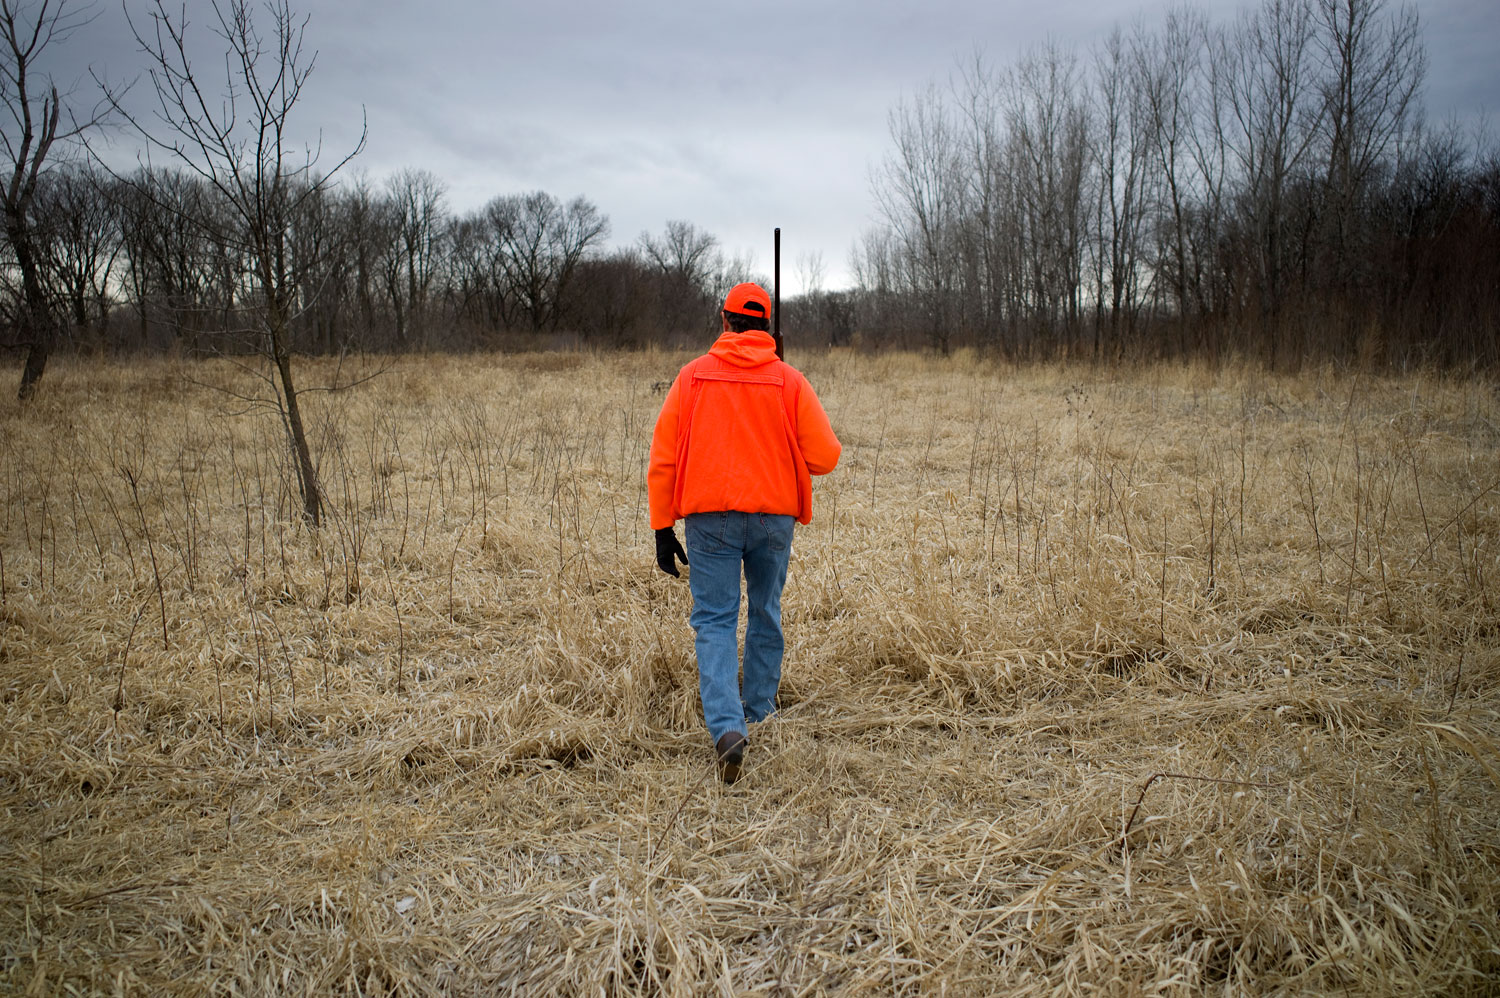 Image: Republican presidential candidate Rick Santorum hunts with Representative Steve King, the prominent social conservative in Iowa. Dec. 26, 2011.